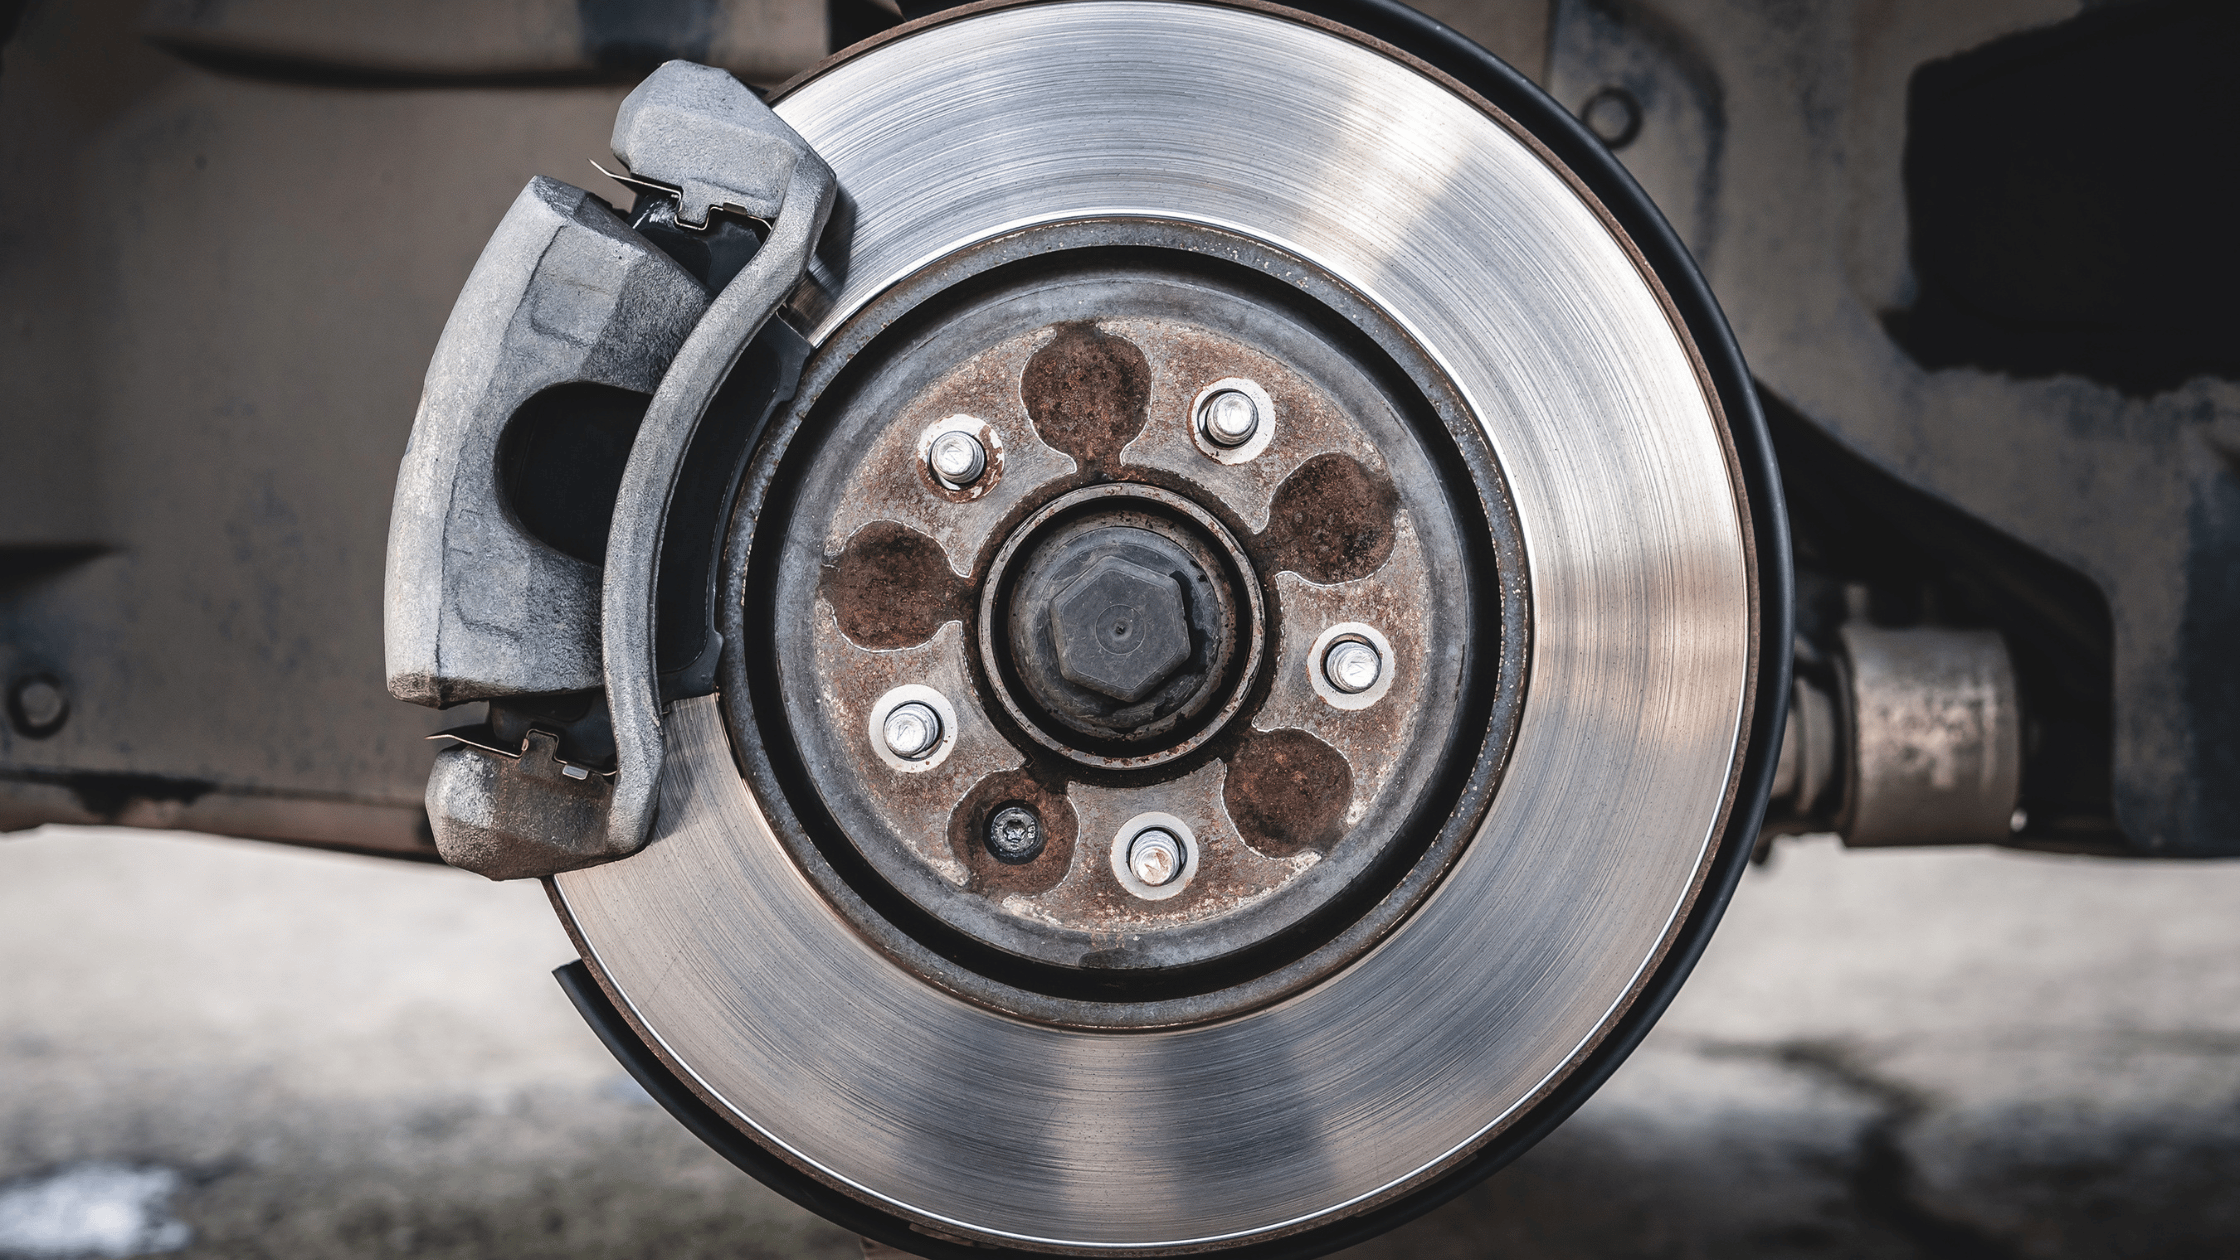 The brake friction products market will hit $17.2 billion by 2032